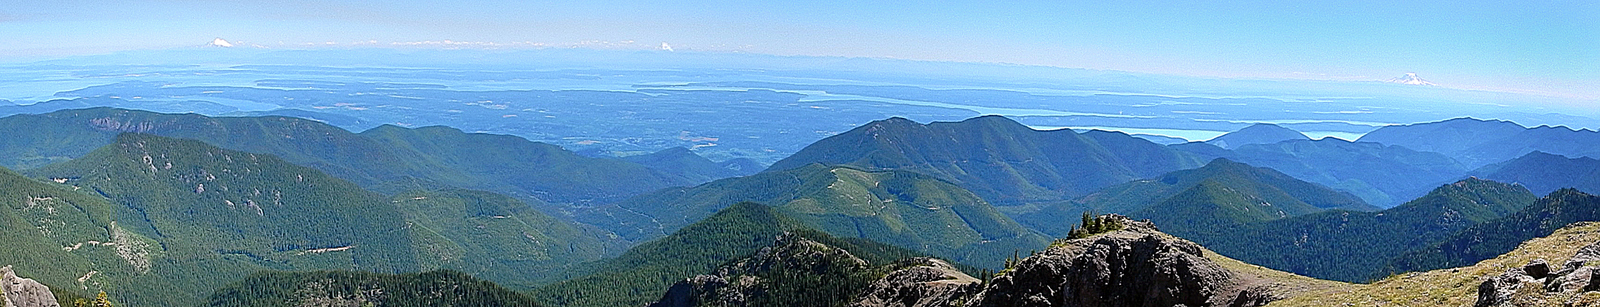  View of Mount Baker, Mount Glacier and Mount Rainier from the top of Mount Townsend 